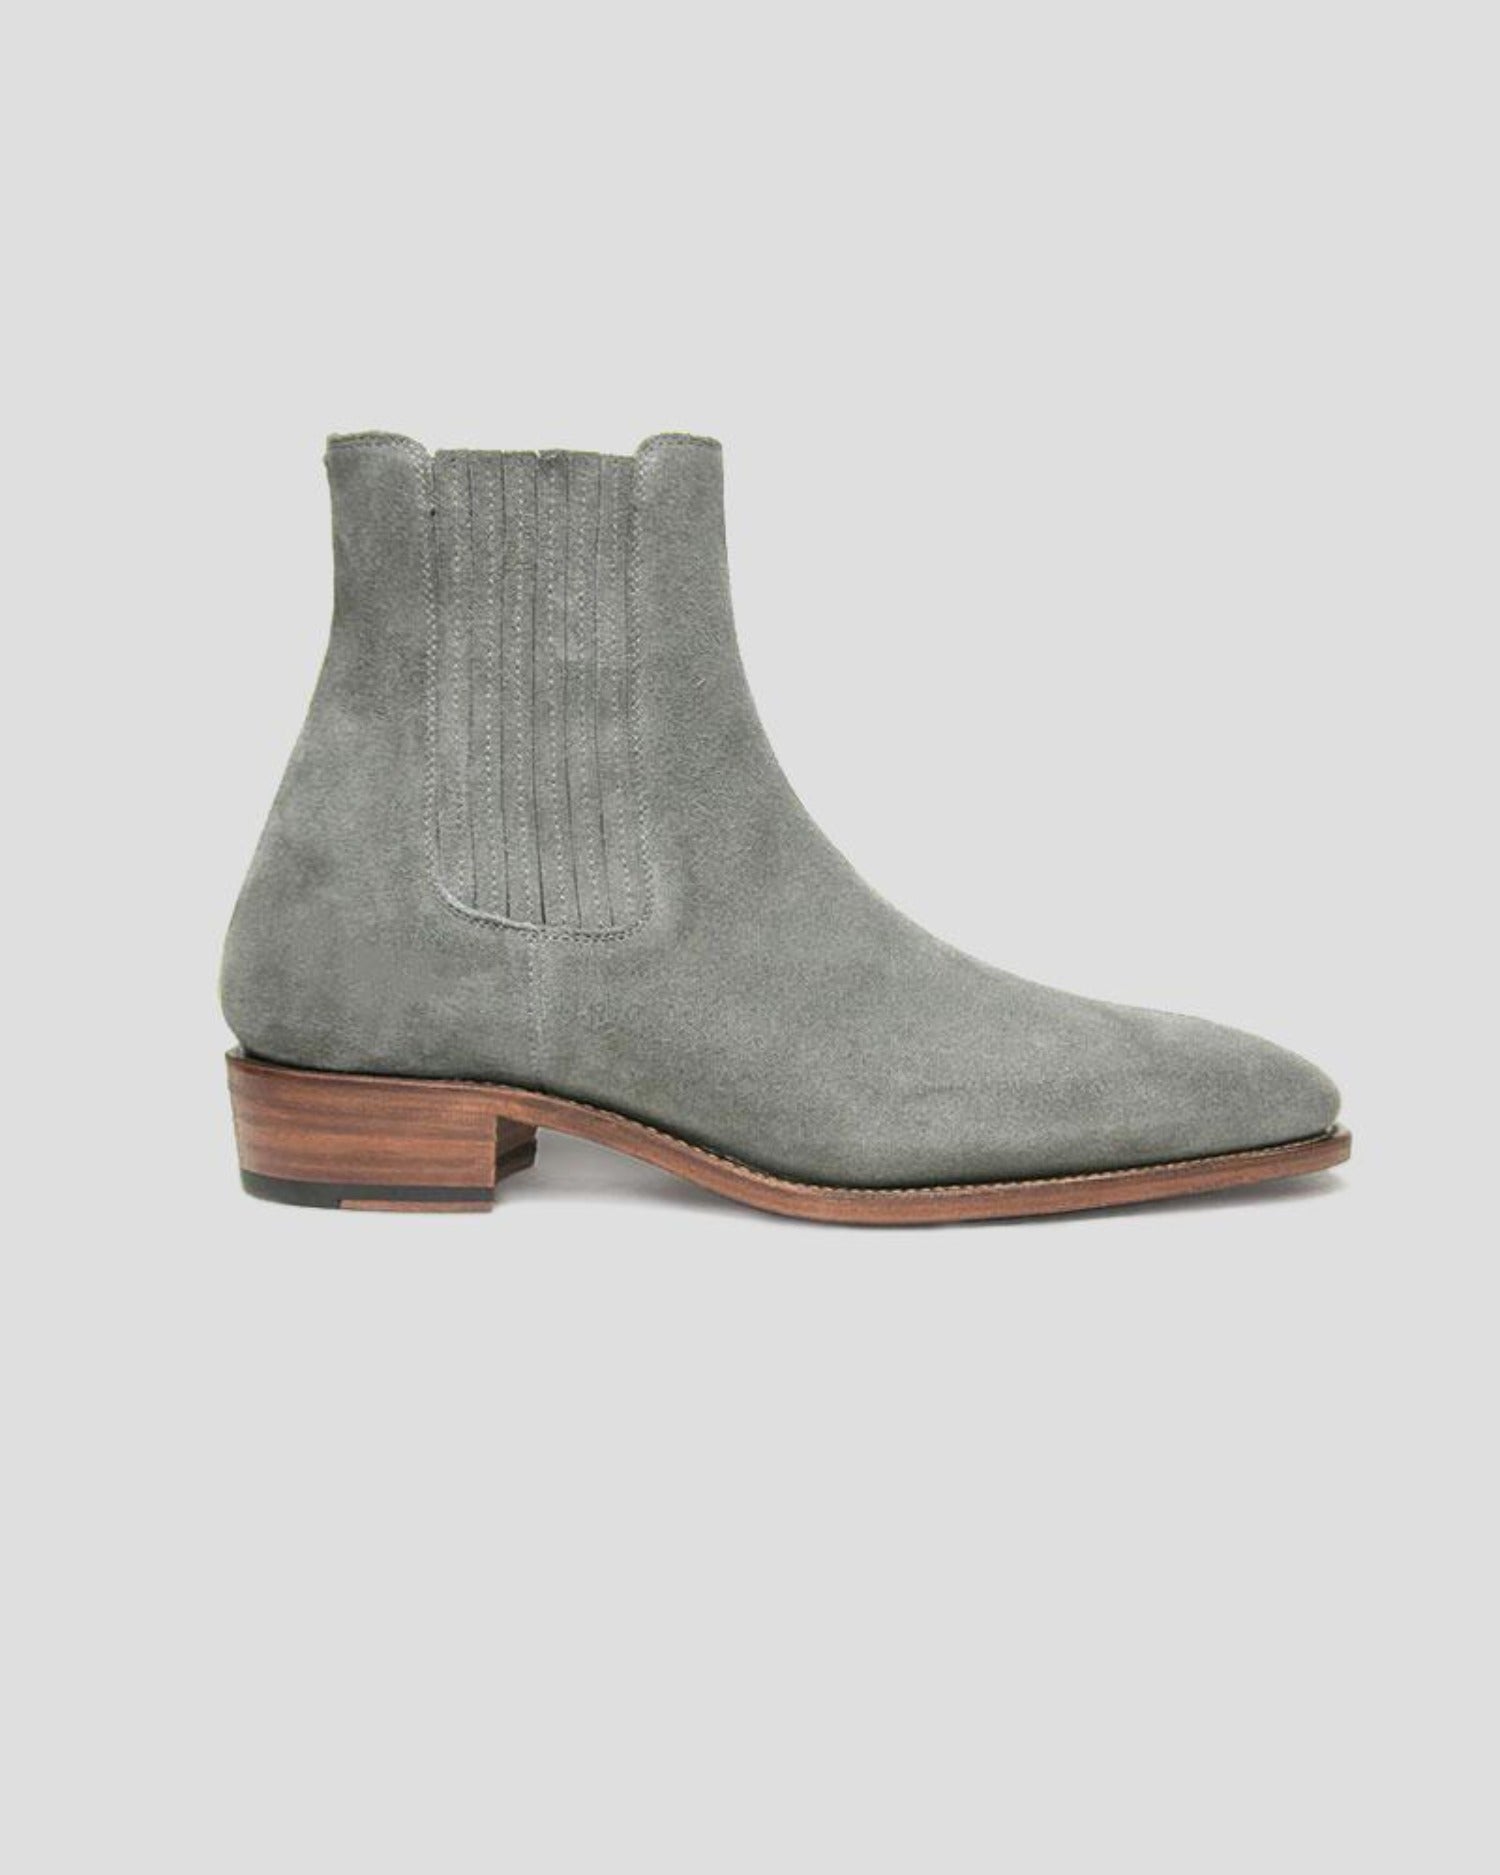 The Chelsea - Men's Ankle Boot - Taupe Suede